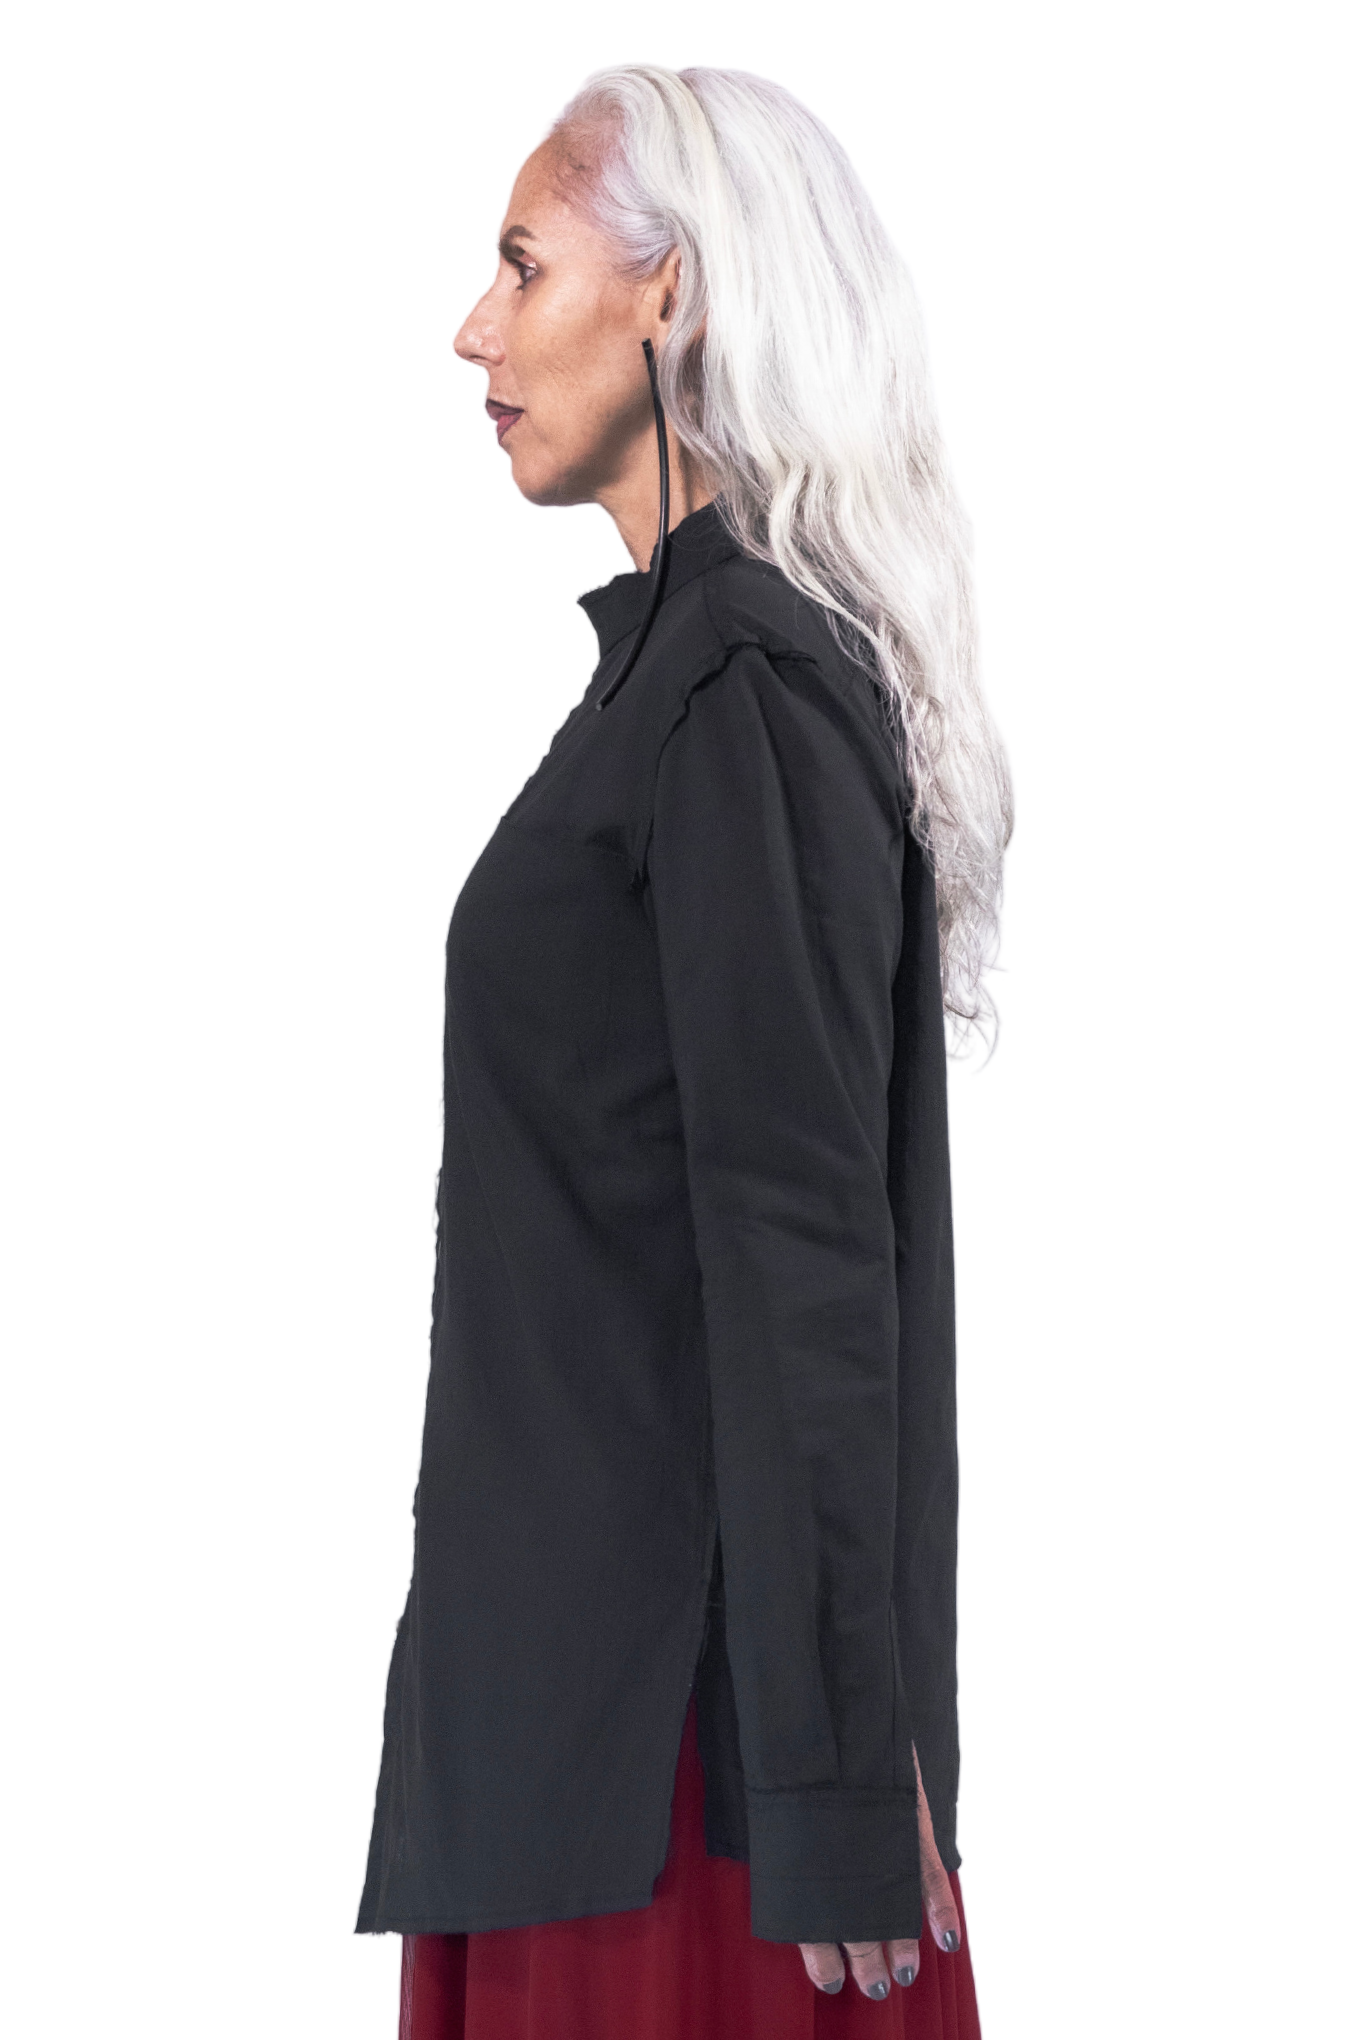 Twins Asymmetrical Shirt with Leather Buttons in BLACK Cotton